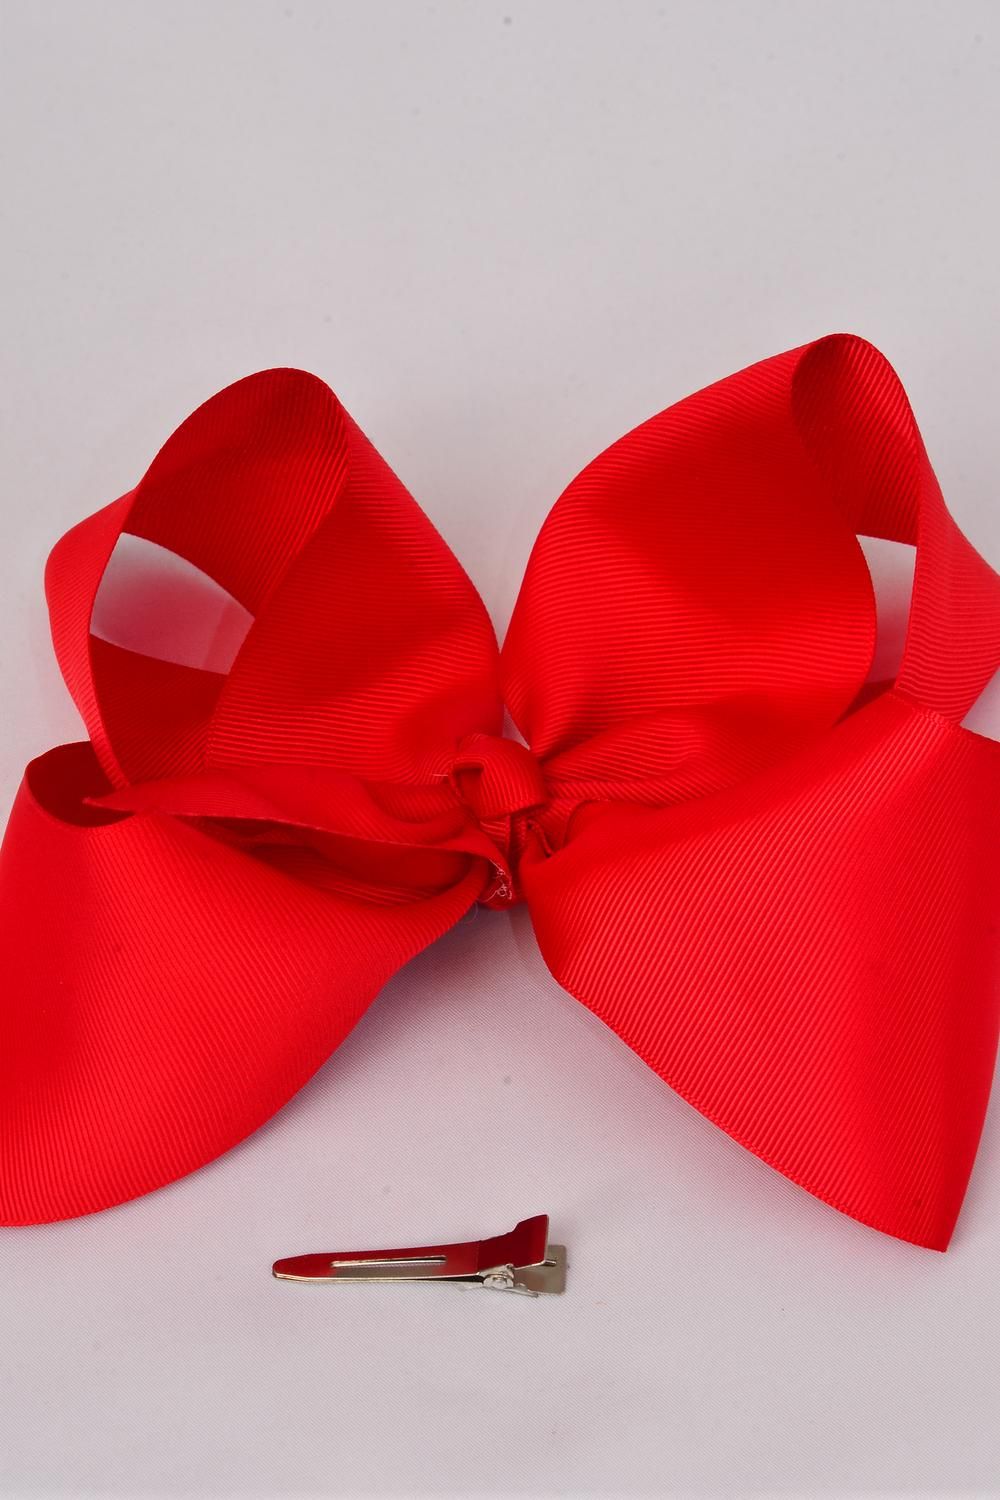 Hair Bow Extra Jumbo Cheer Type Bow Red Grosgrain Bow Tiedz Red Alligator Clipsize 8x 7 8929